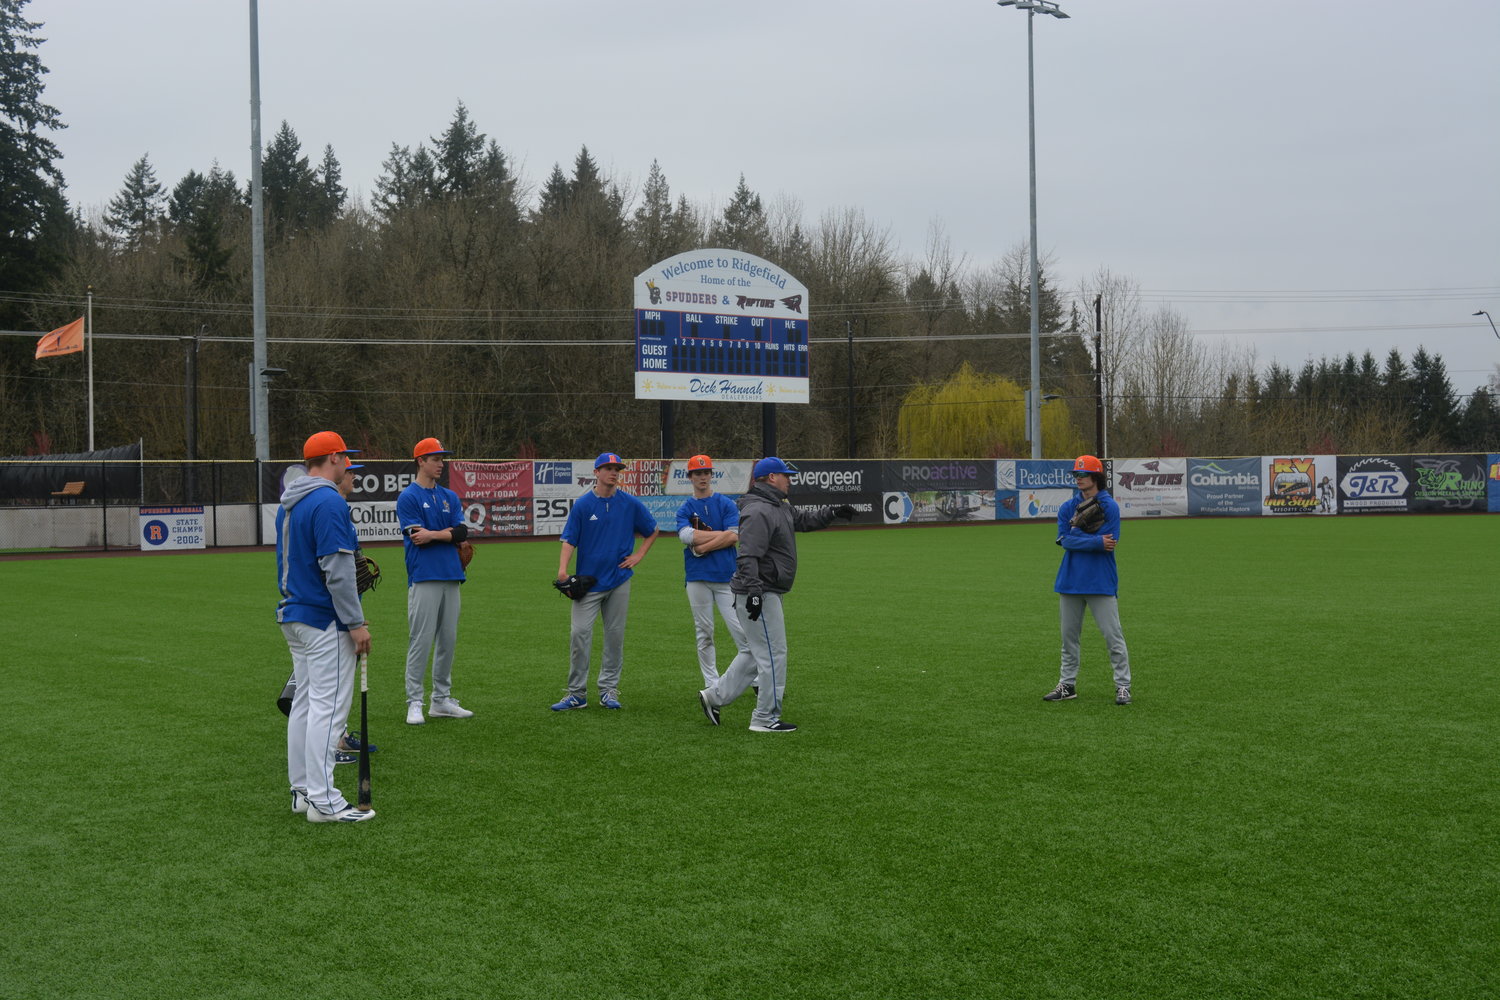 Coach Nick Allen instructs a number of players on the varsity baseball team during a March 17 practice at the Ridgefield Outdoor Recreation Complex in preparation for its game against Lynden High School.